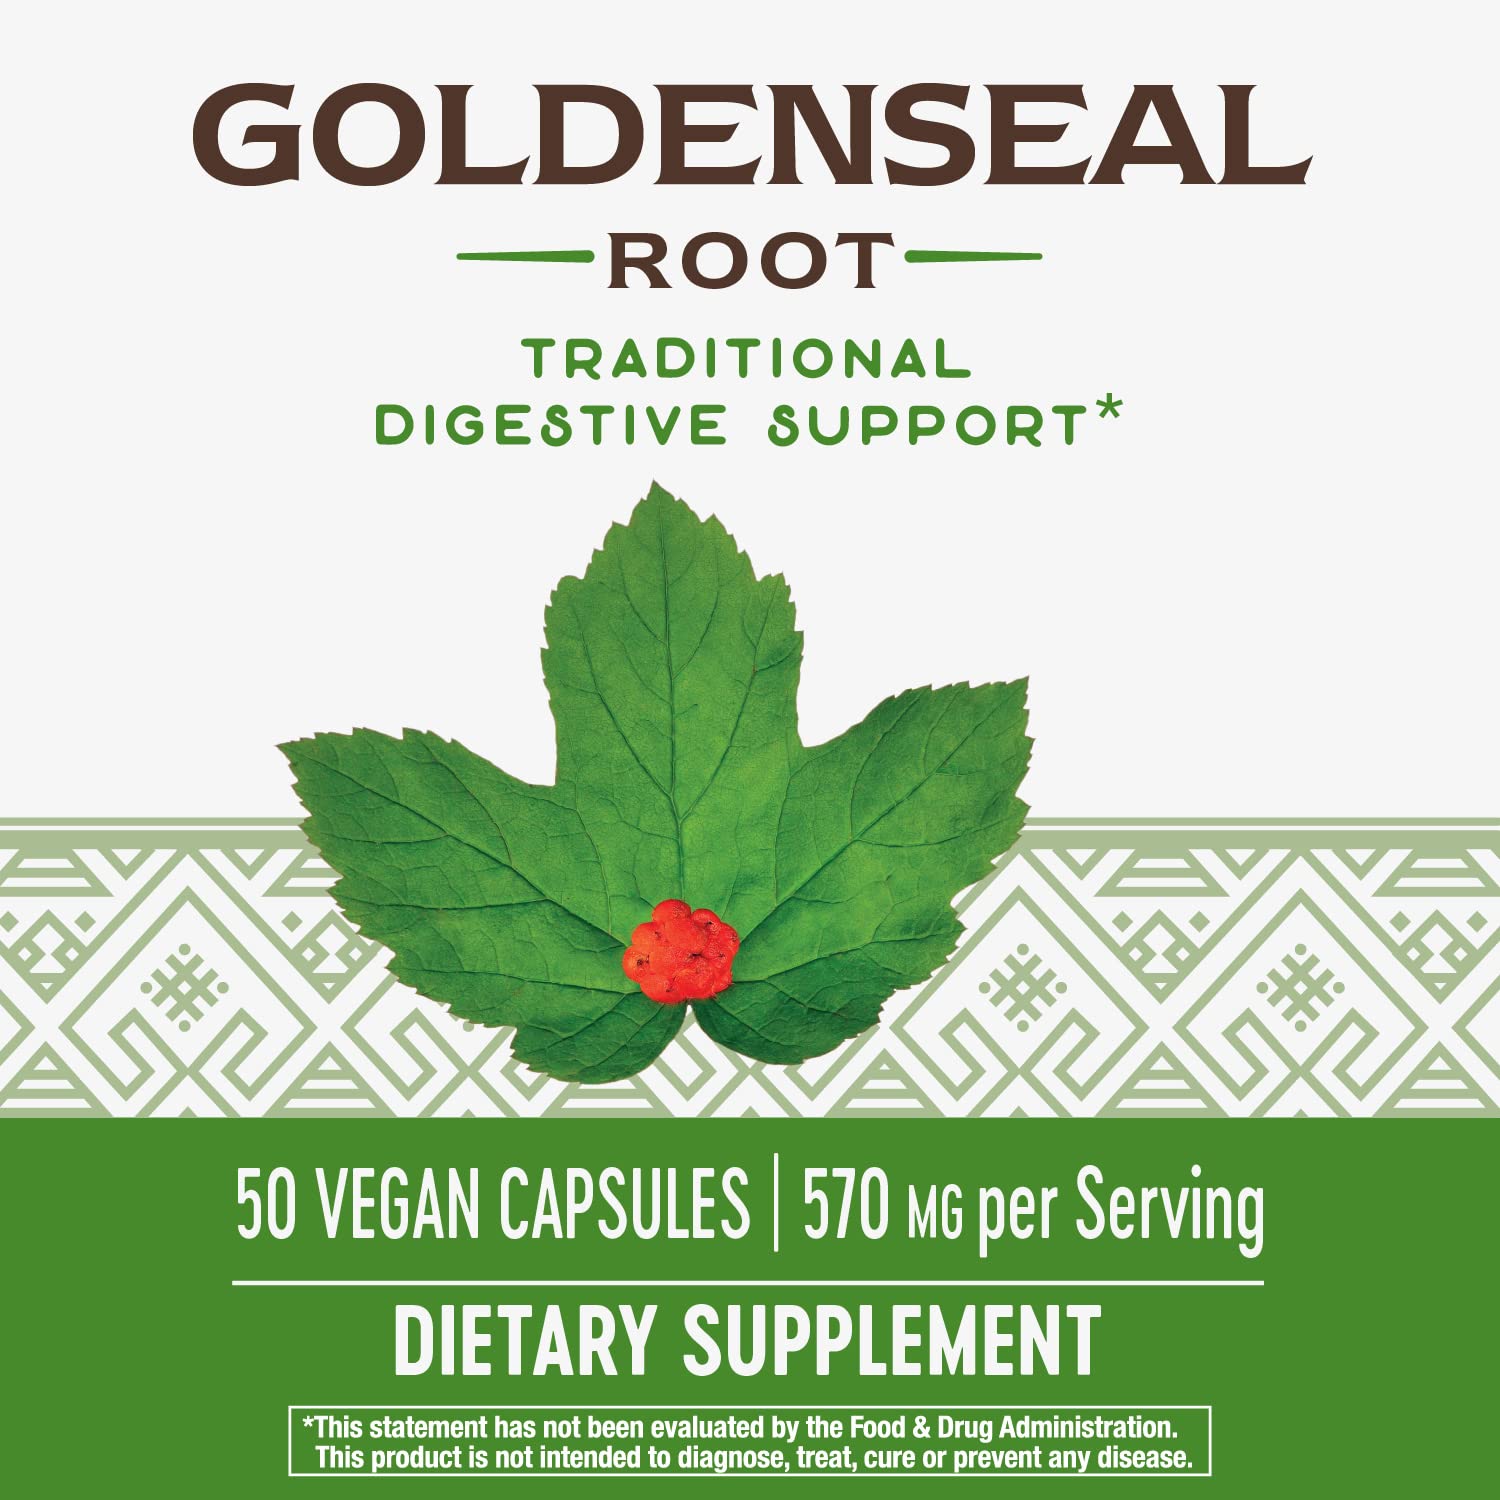 Nature's Way Goldenseal Root Traditional Digestive Support* Non-GMO Project Verified Vegan 50 Capsules